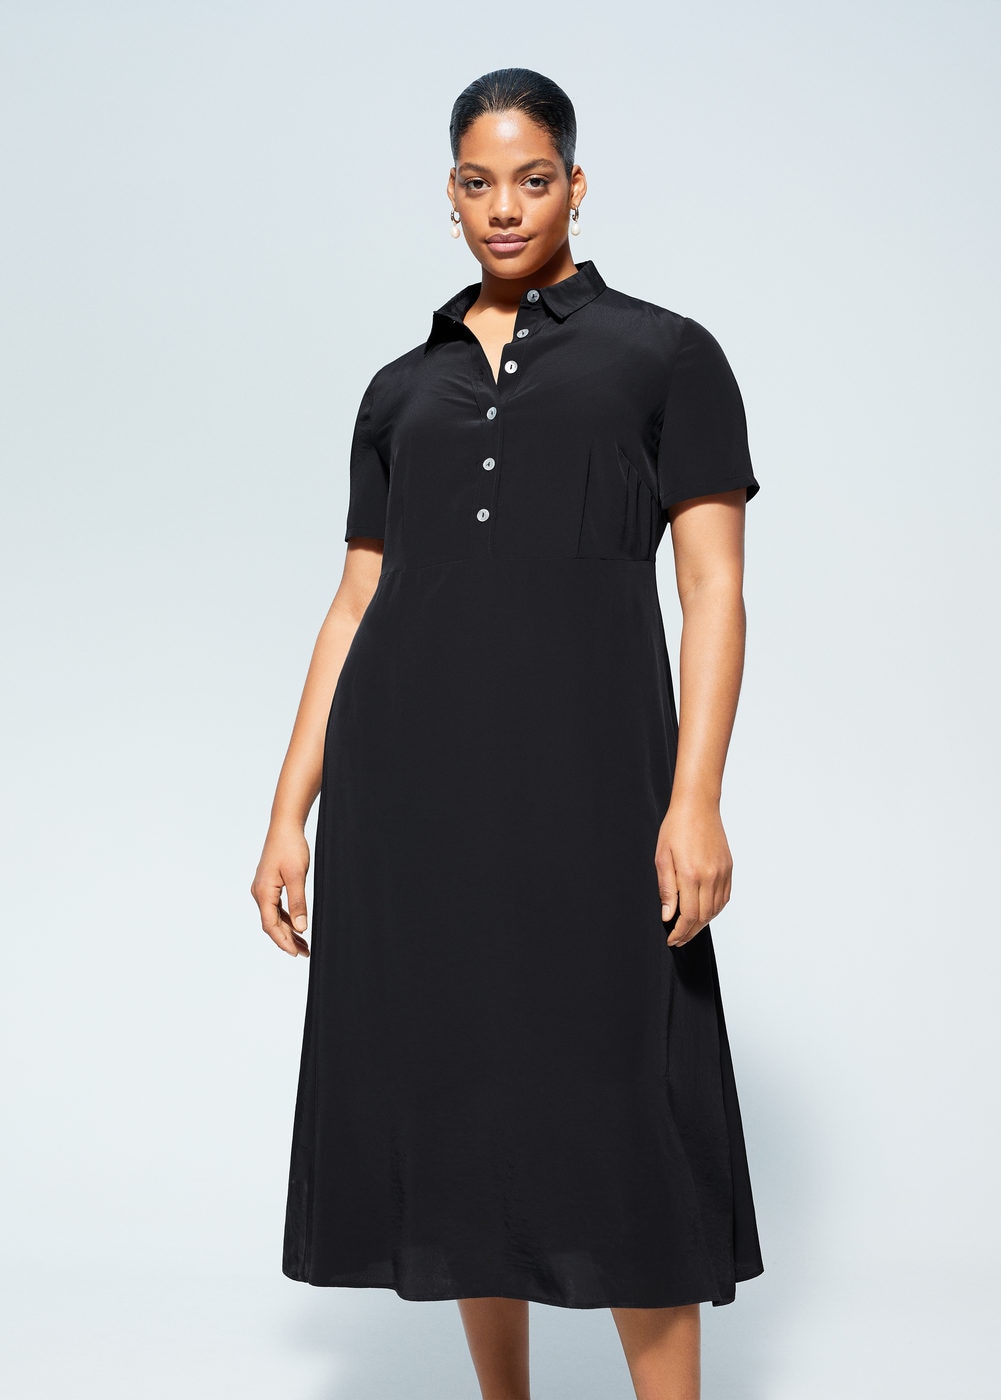 27 Comfortable Mango Dresses I'd Like to Buy Immediately | Who What Wear